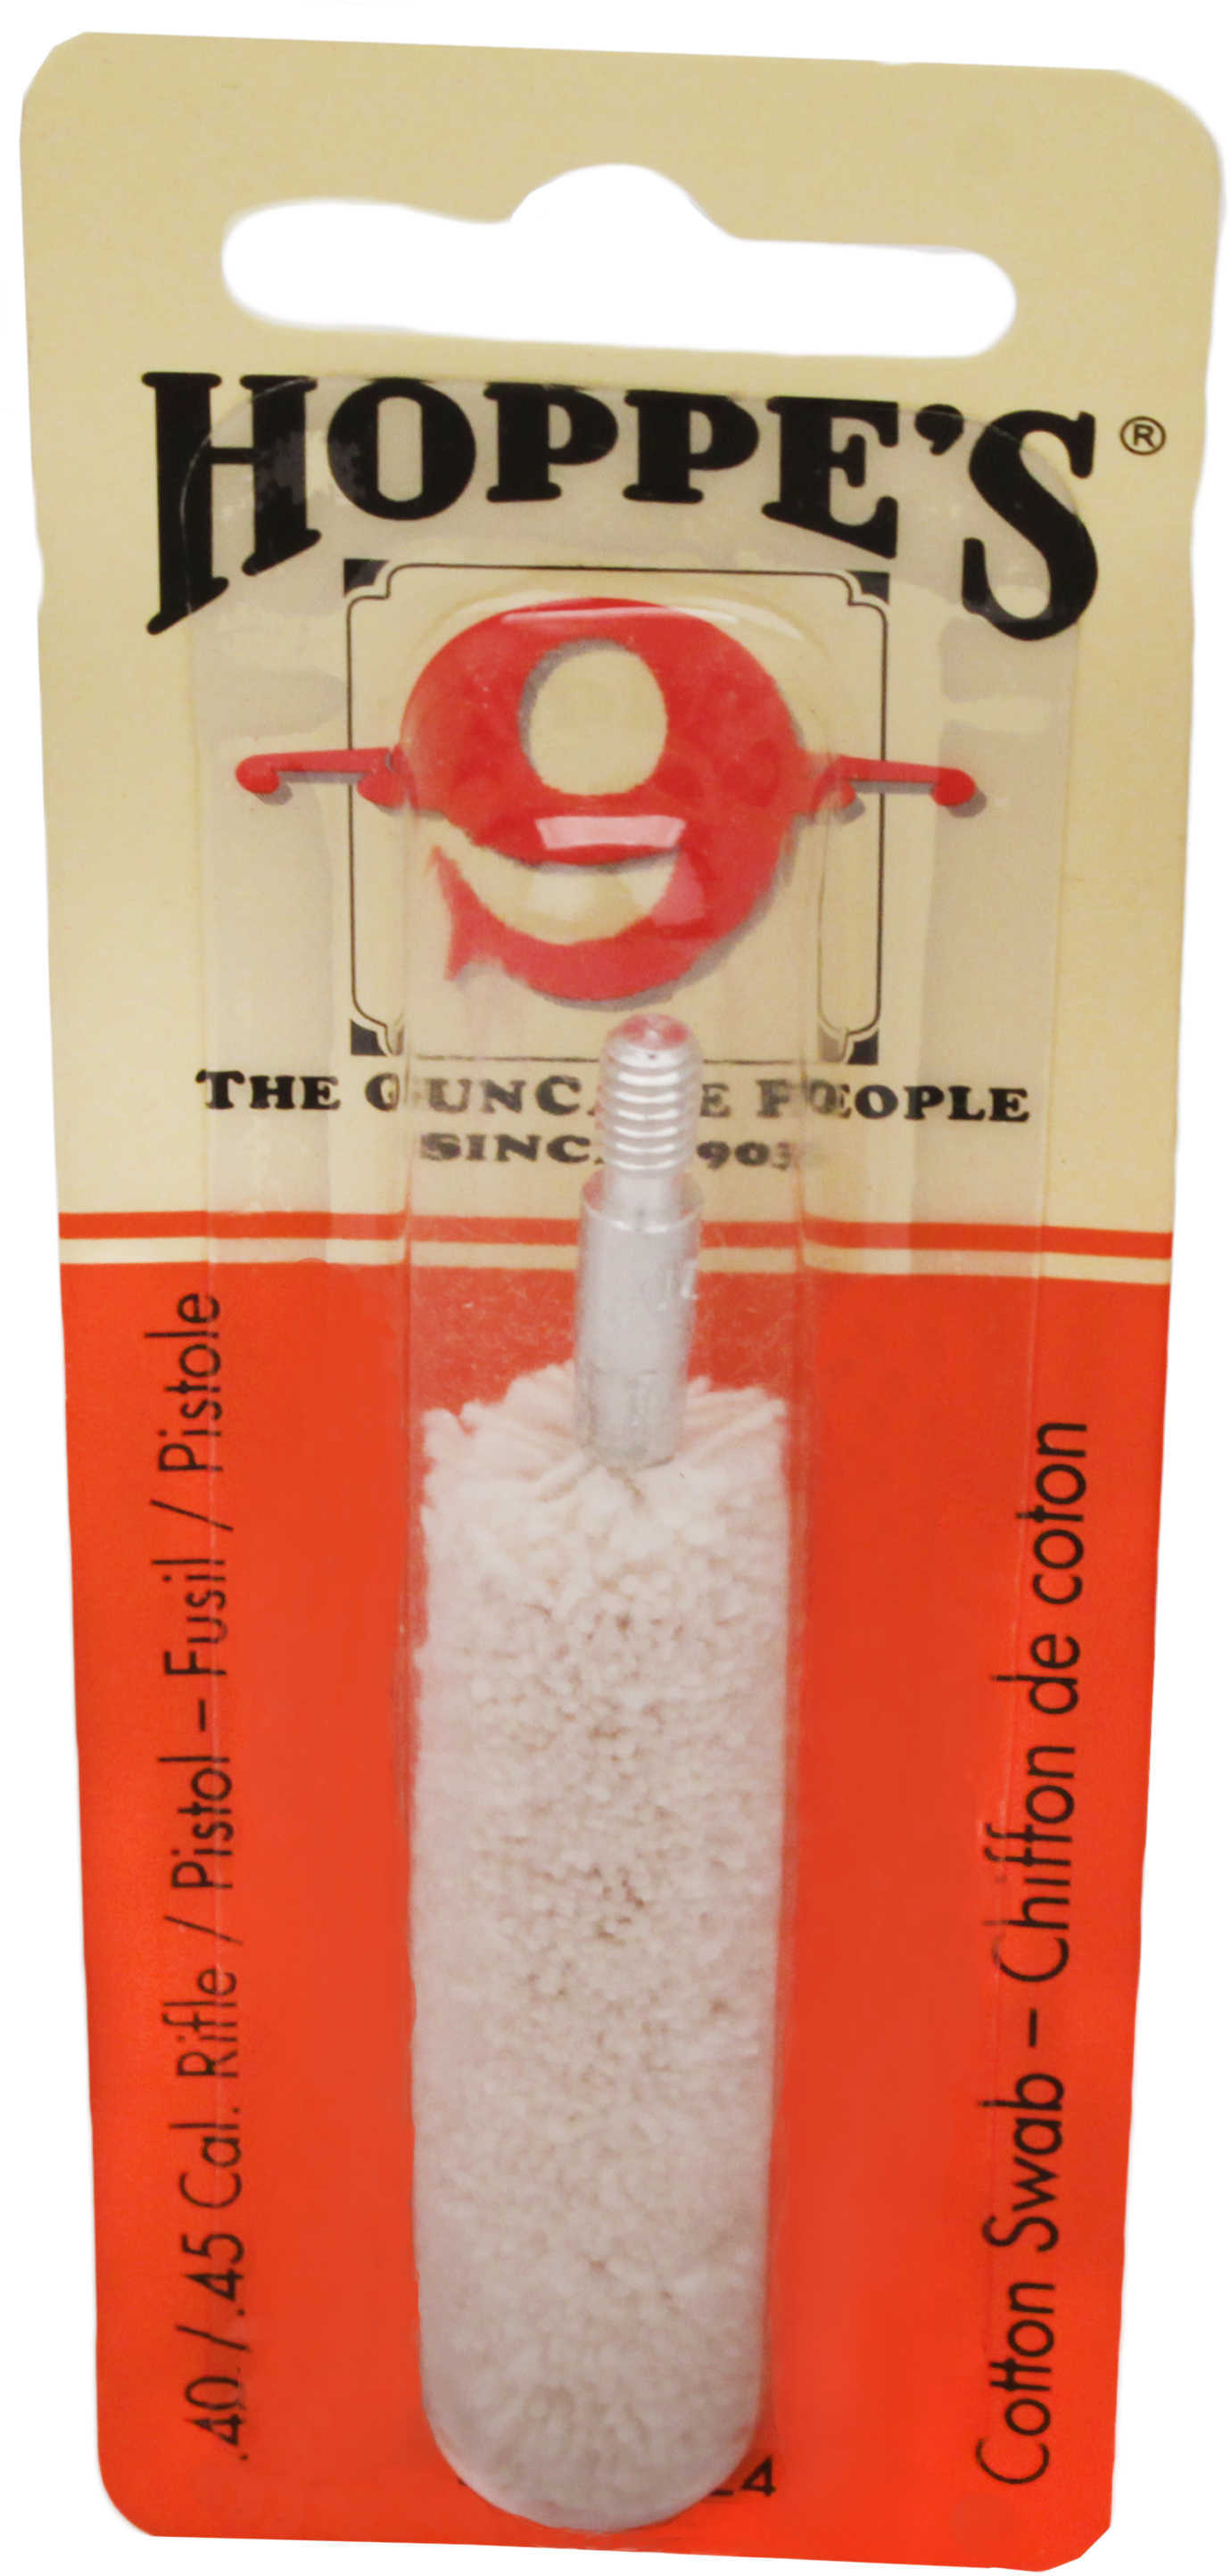 Hoppes Rifle Cleaning Swab .40, .45 Caliber 100% Cotton Swabs Are Soft, Washable And Will Not Scratch The Bore